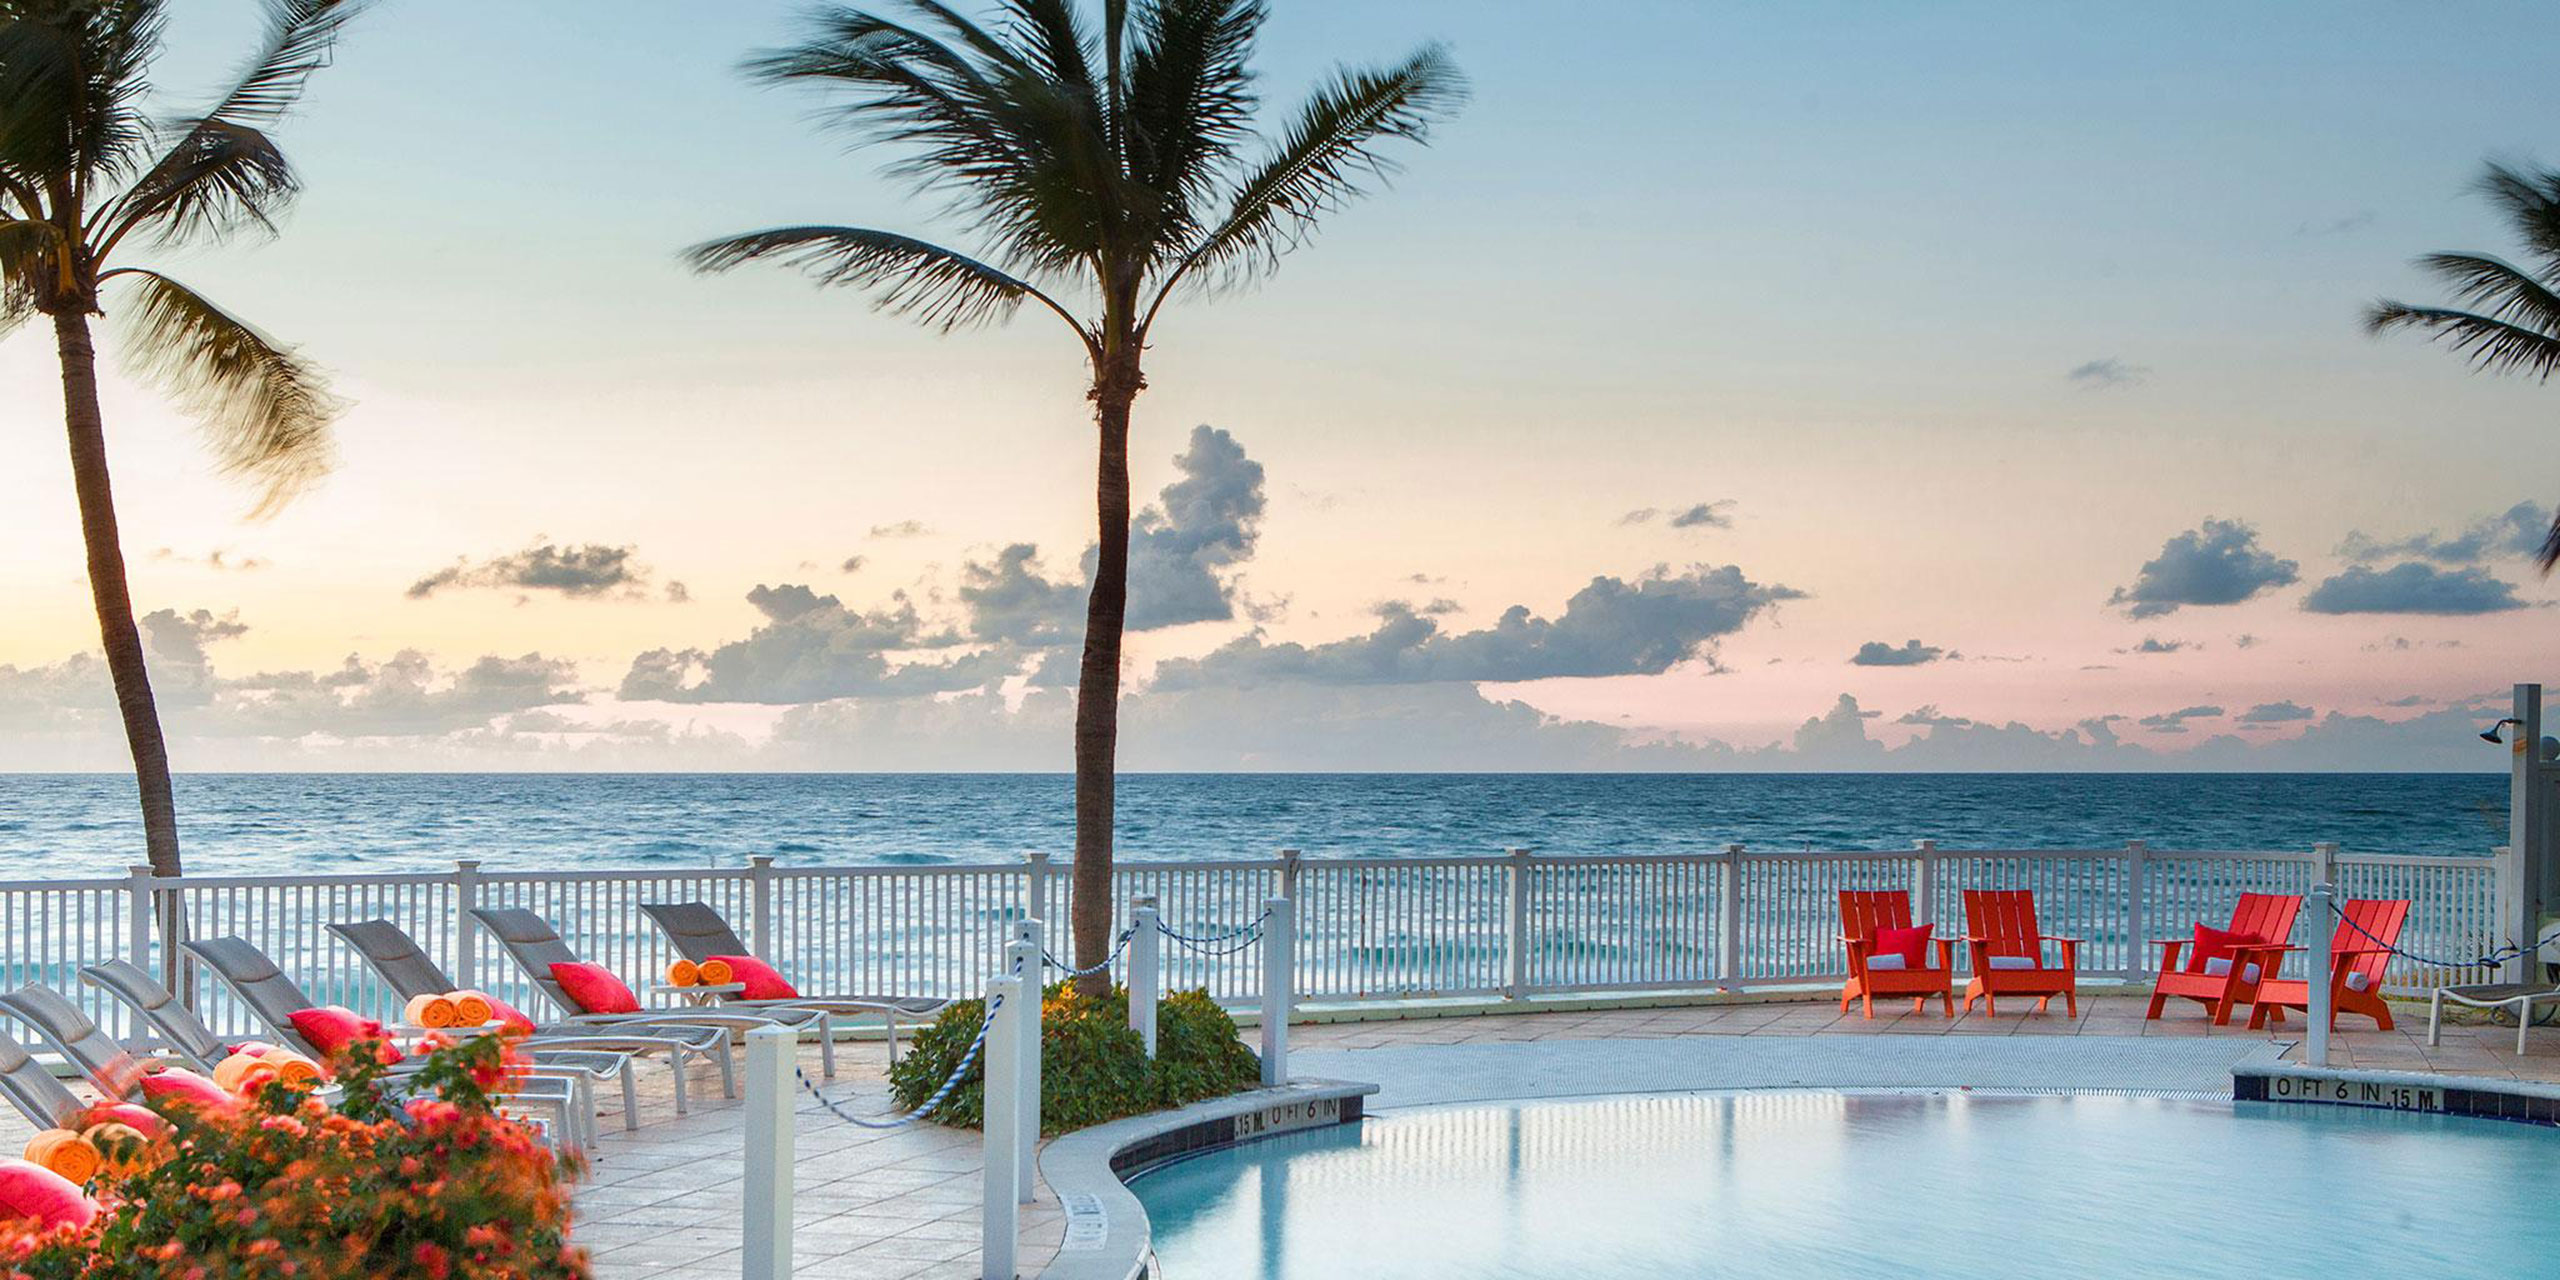 We've found the best family resorts in Fort Lauderdale, all of which a...